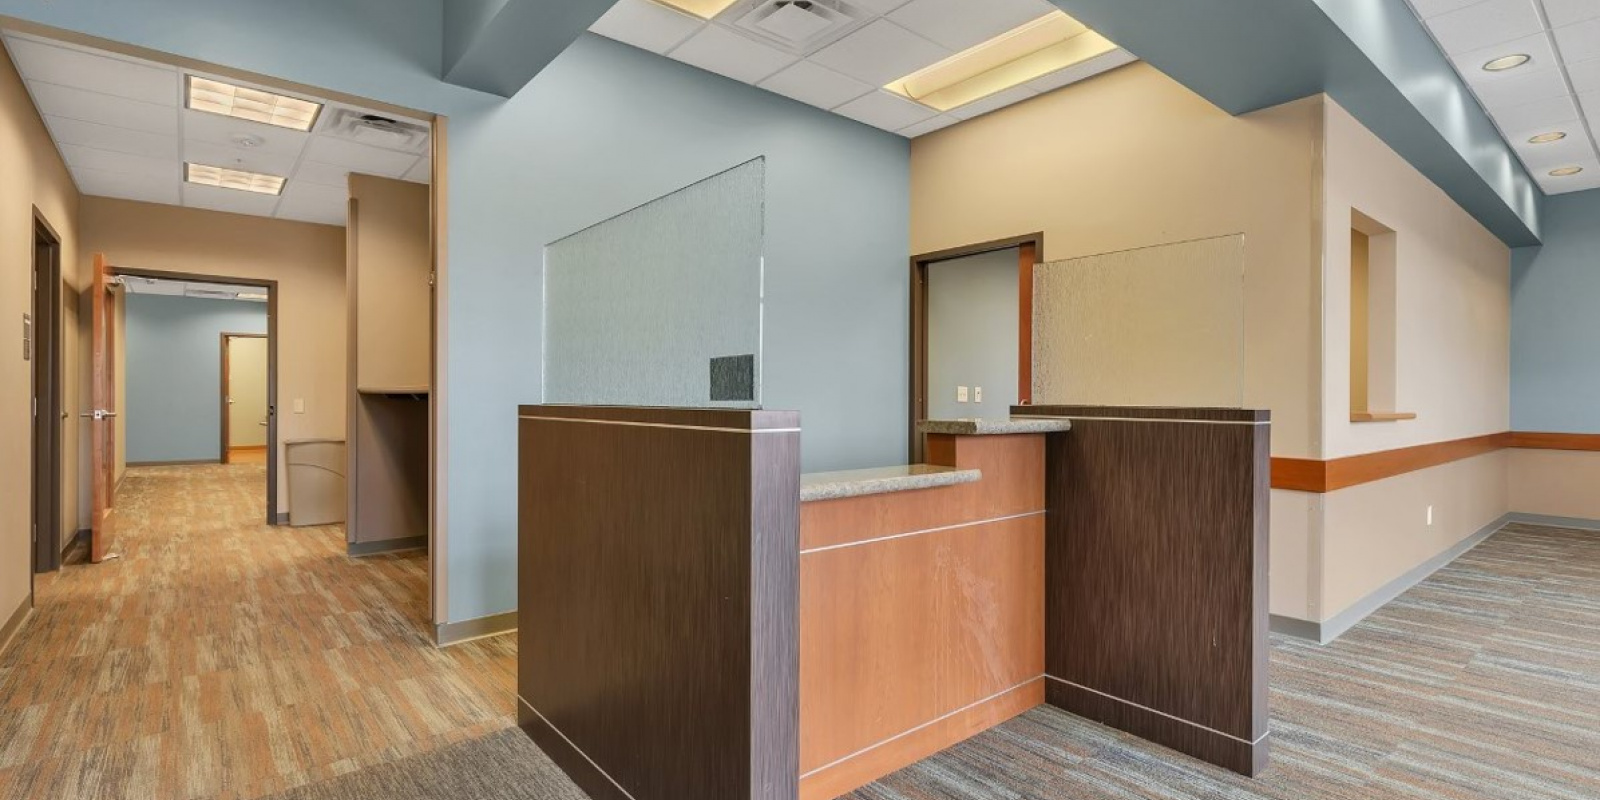 Medical, Retail Office Suite for Lease in Pine City, MN 